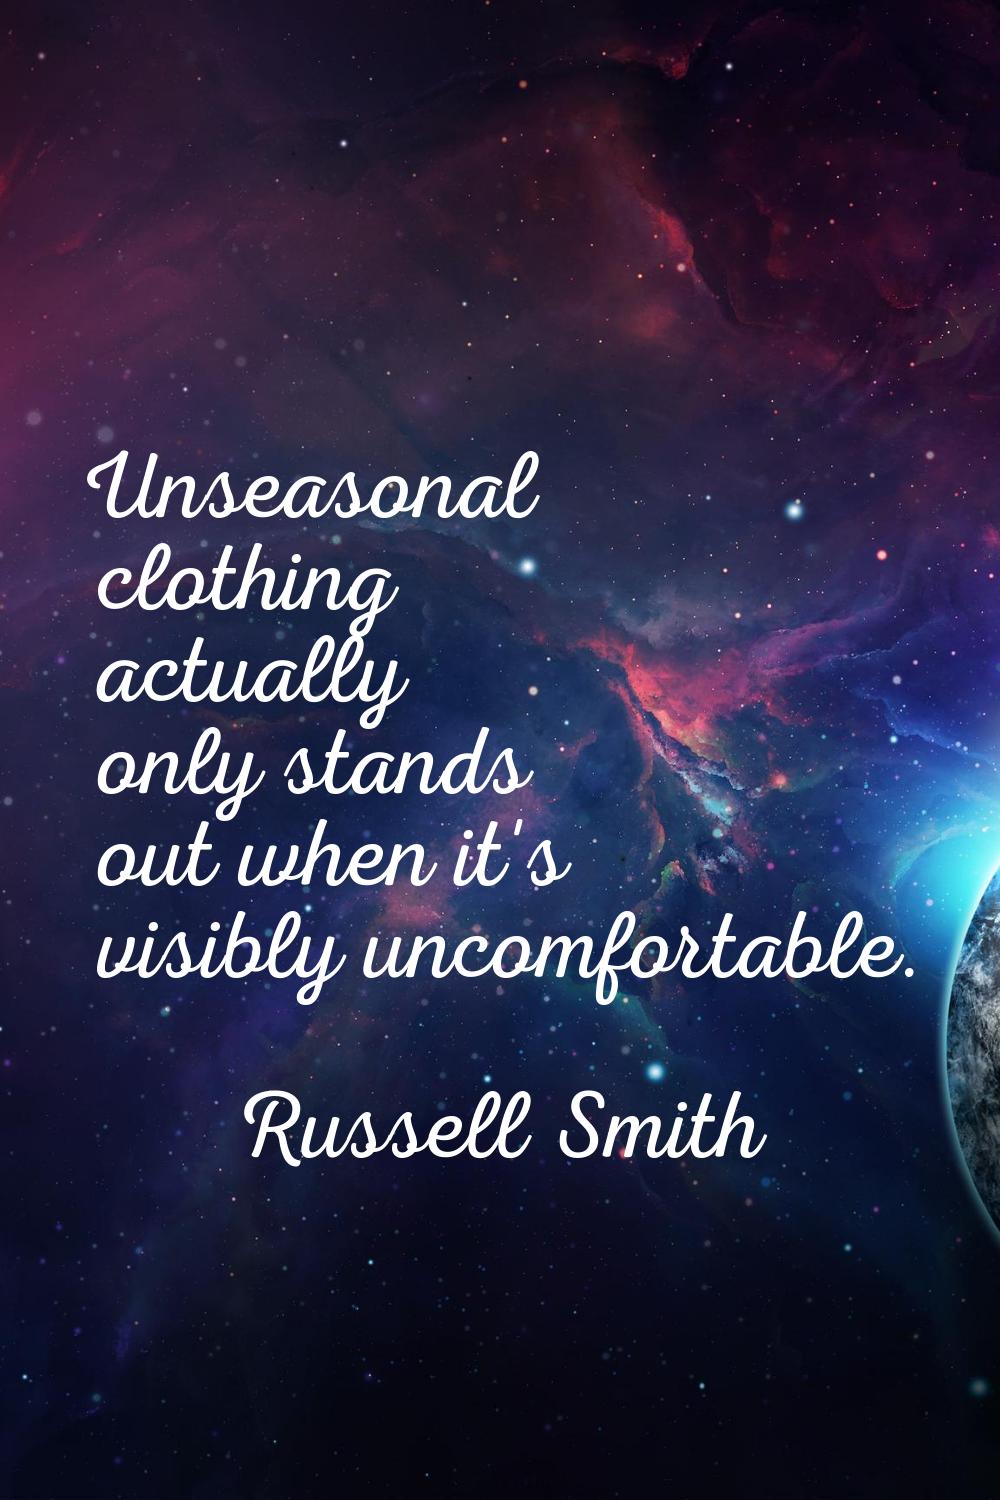 Unseasonal clothing actually only stands out when it's visibly uncomfortable.